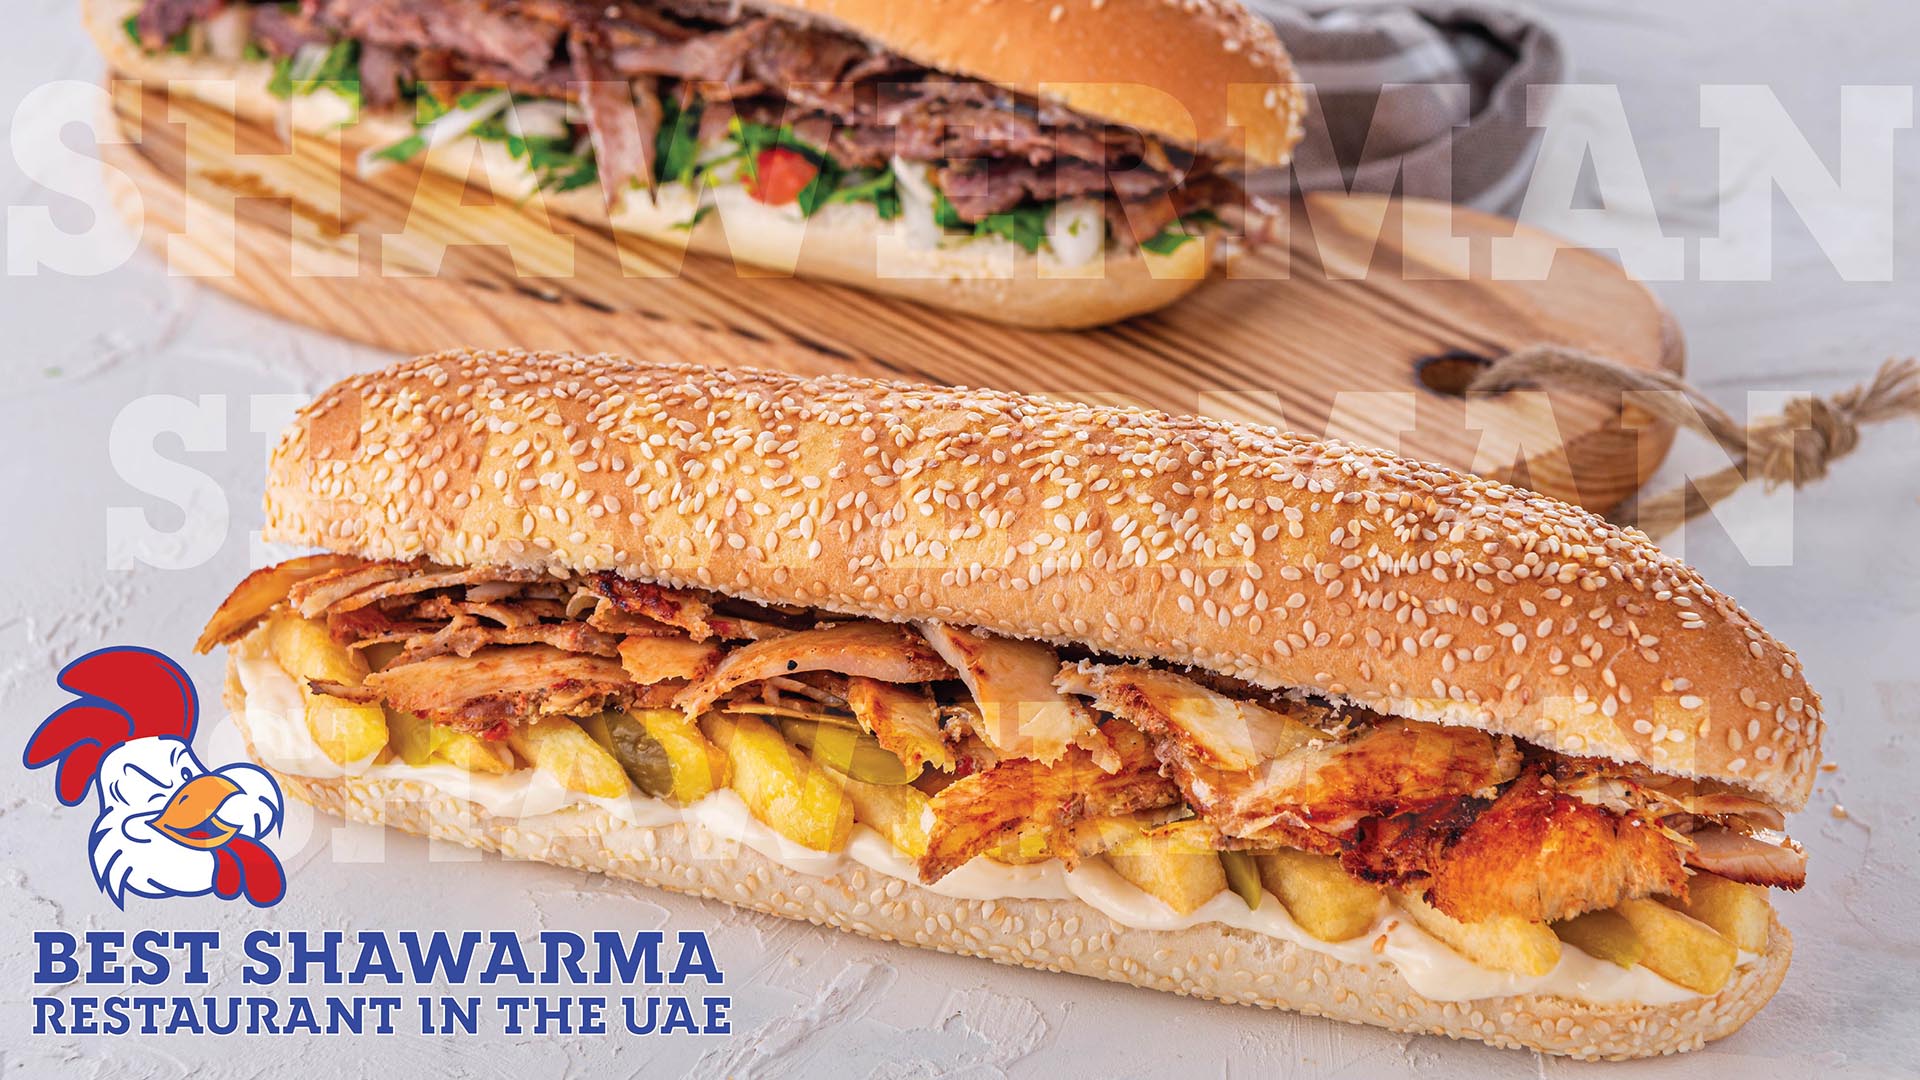 Let the Flavor of Our Shawarma Take You Around the World